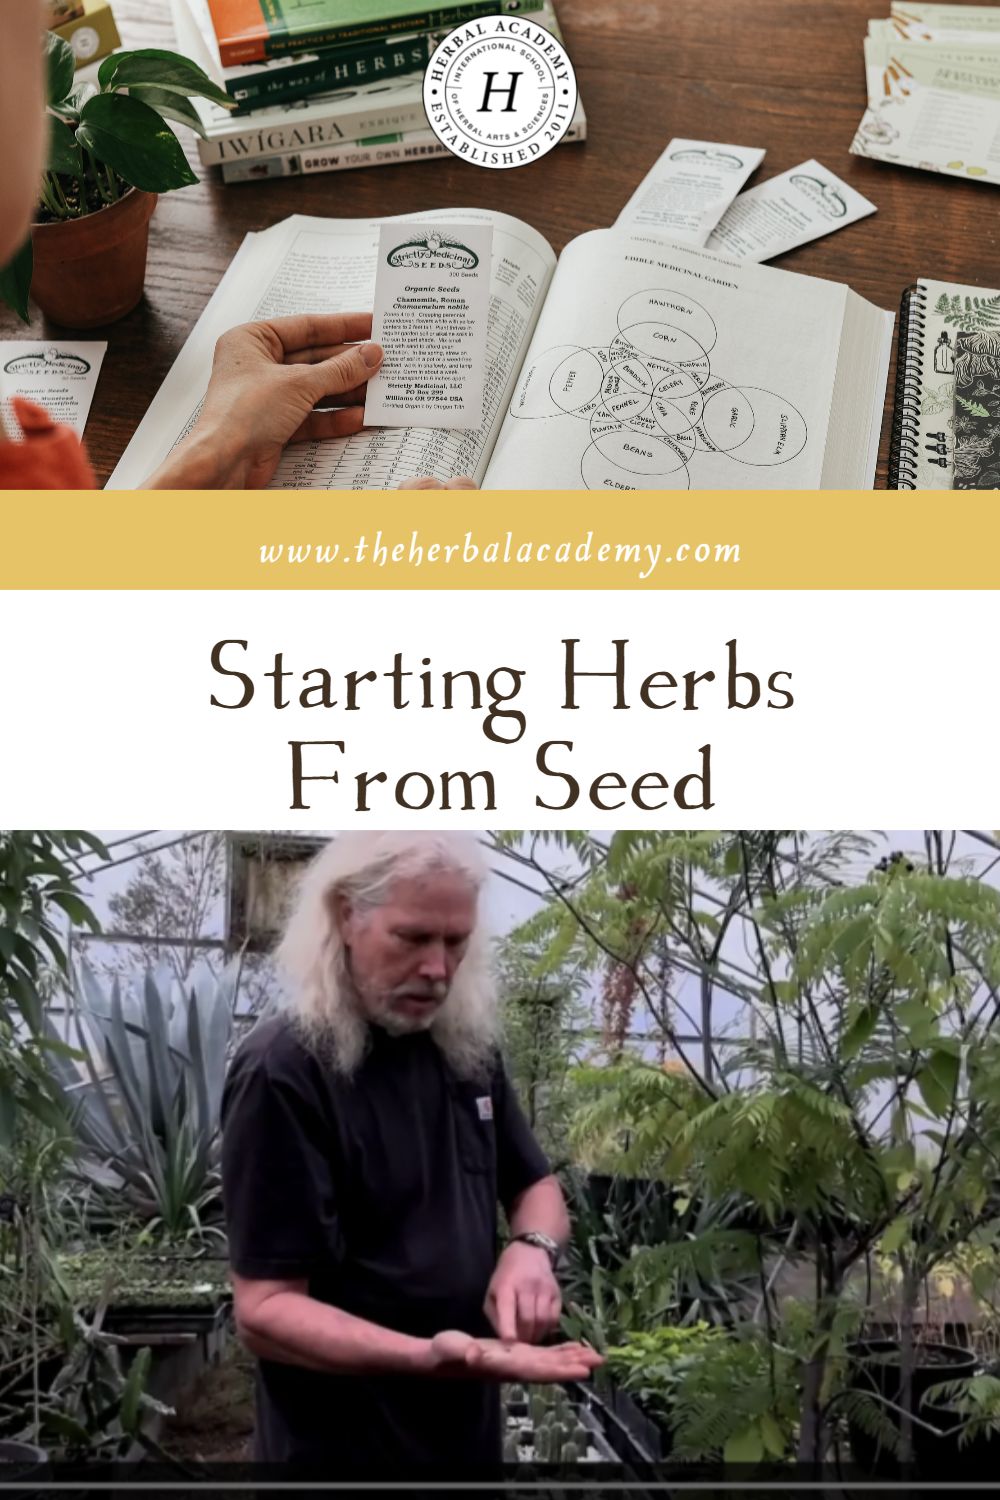 Starting Herbs From Seed | Herbal Academy | We are sharing Richo Cech’s new book, Growing Plant Medicine, with you to give you some knowledge for starting herbs from seed.